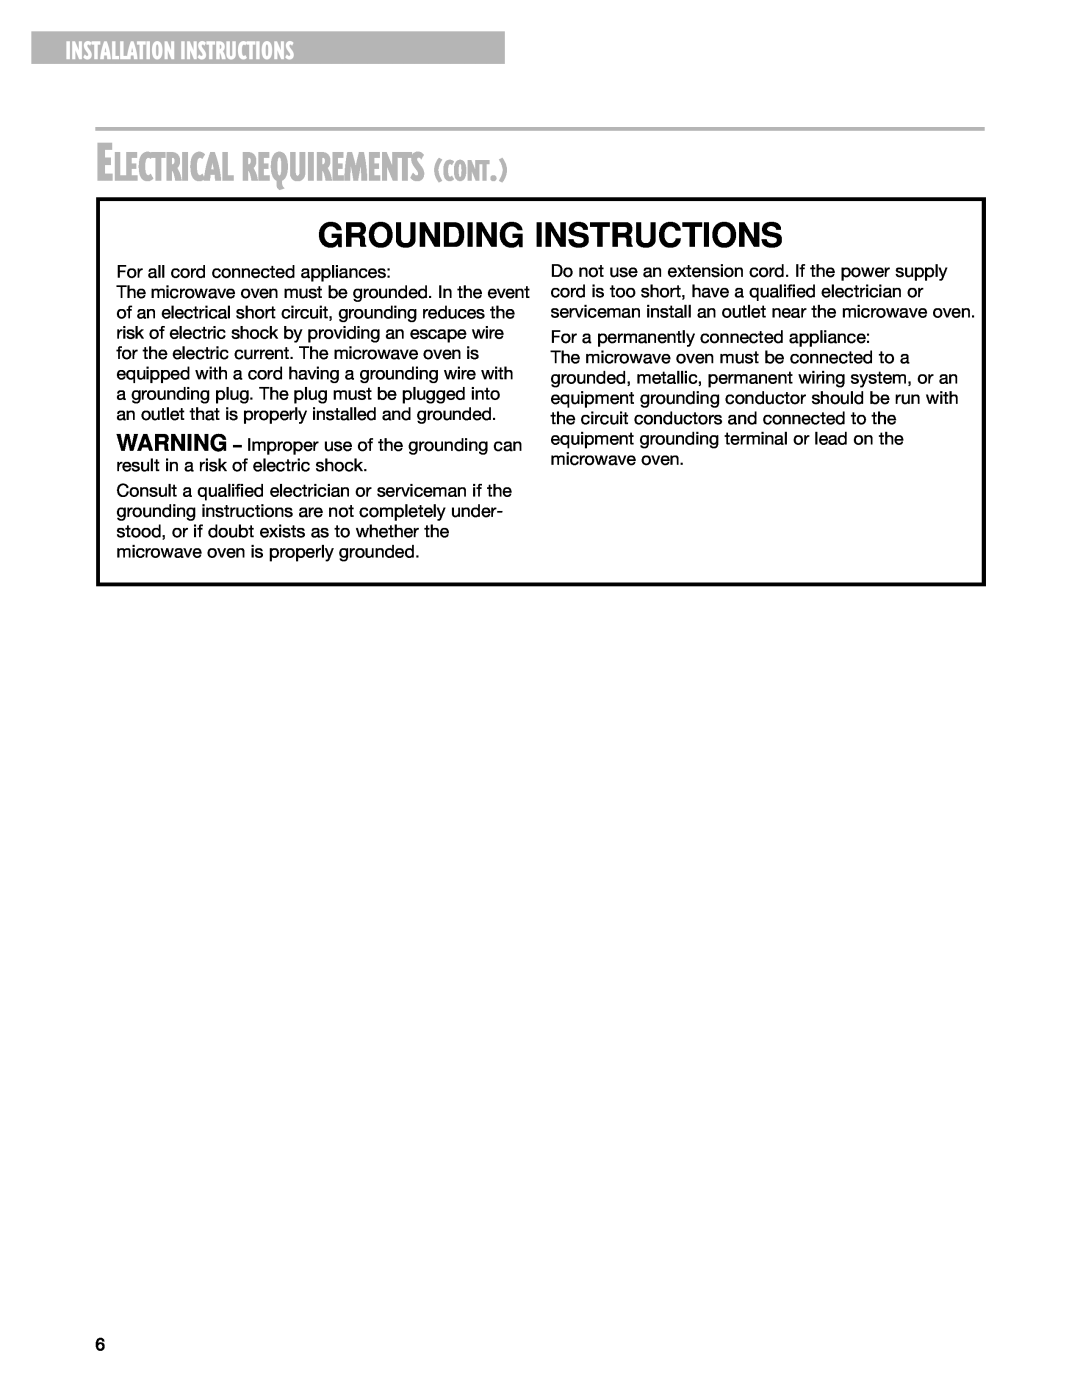 Whirlpool MT1078SG, MT1071SG Electrical Requirements Cont, Grounding Instructions, Installation Instructions 